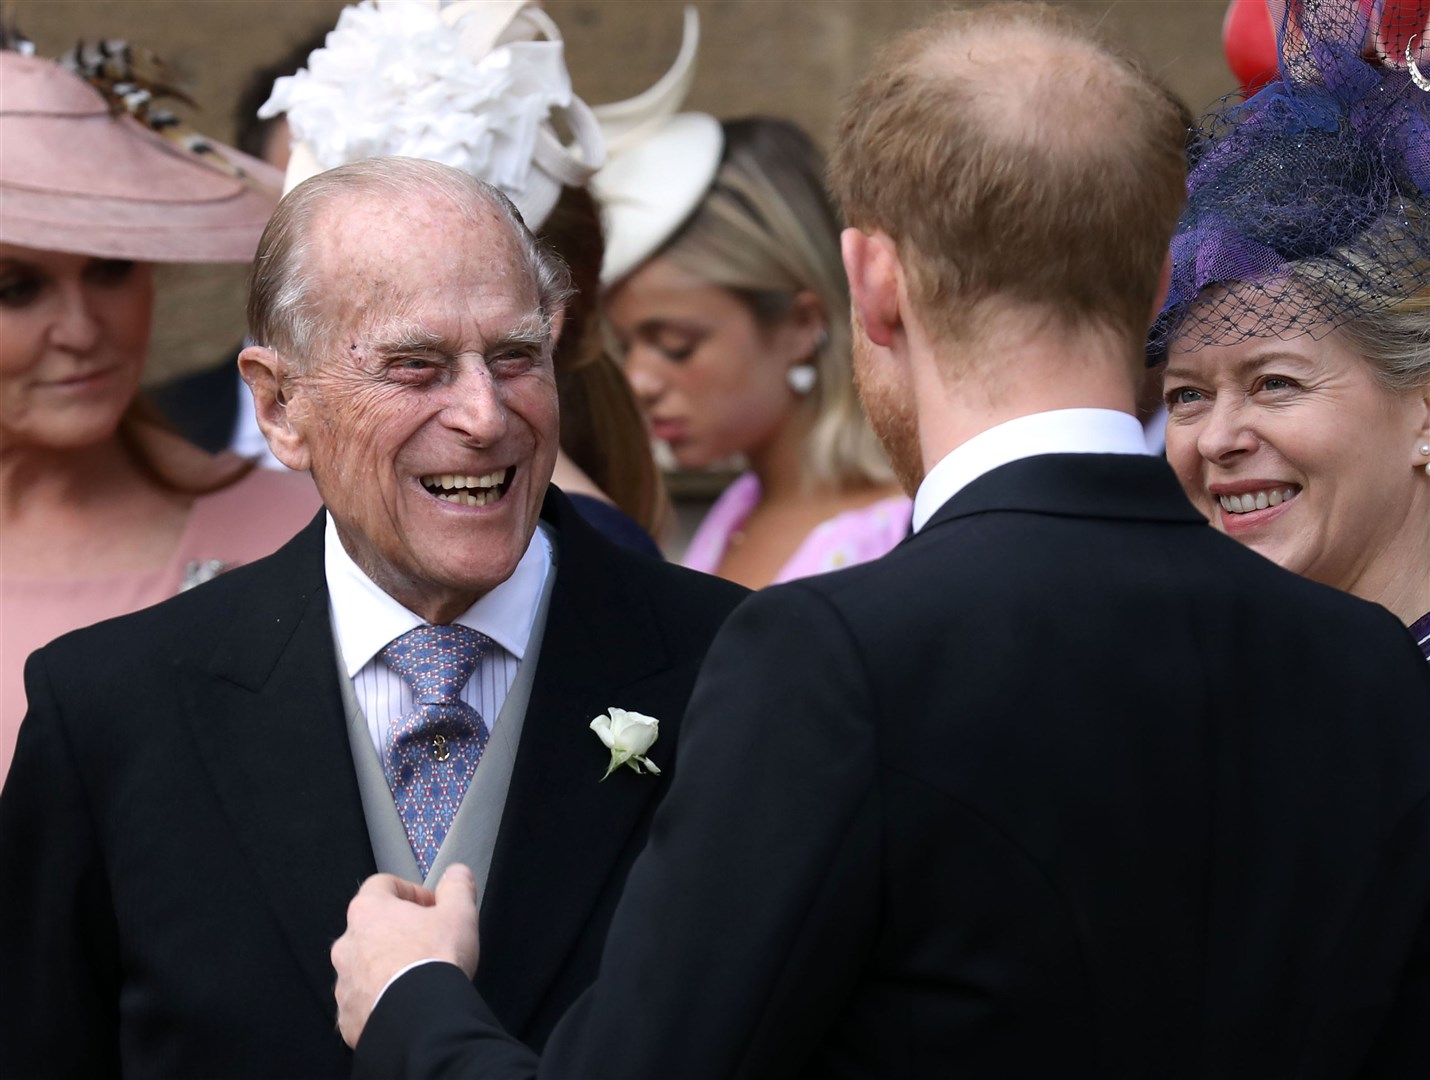 Harry with his grandfather Philip at a family wedding (Steve Parsons/PA)